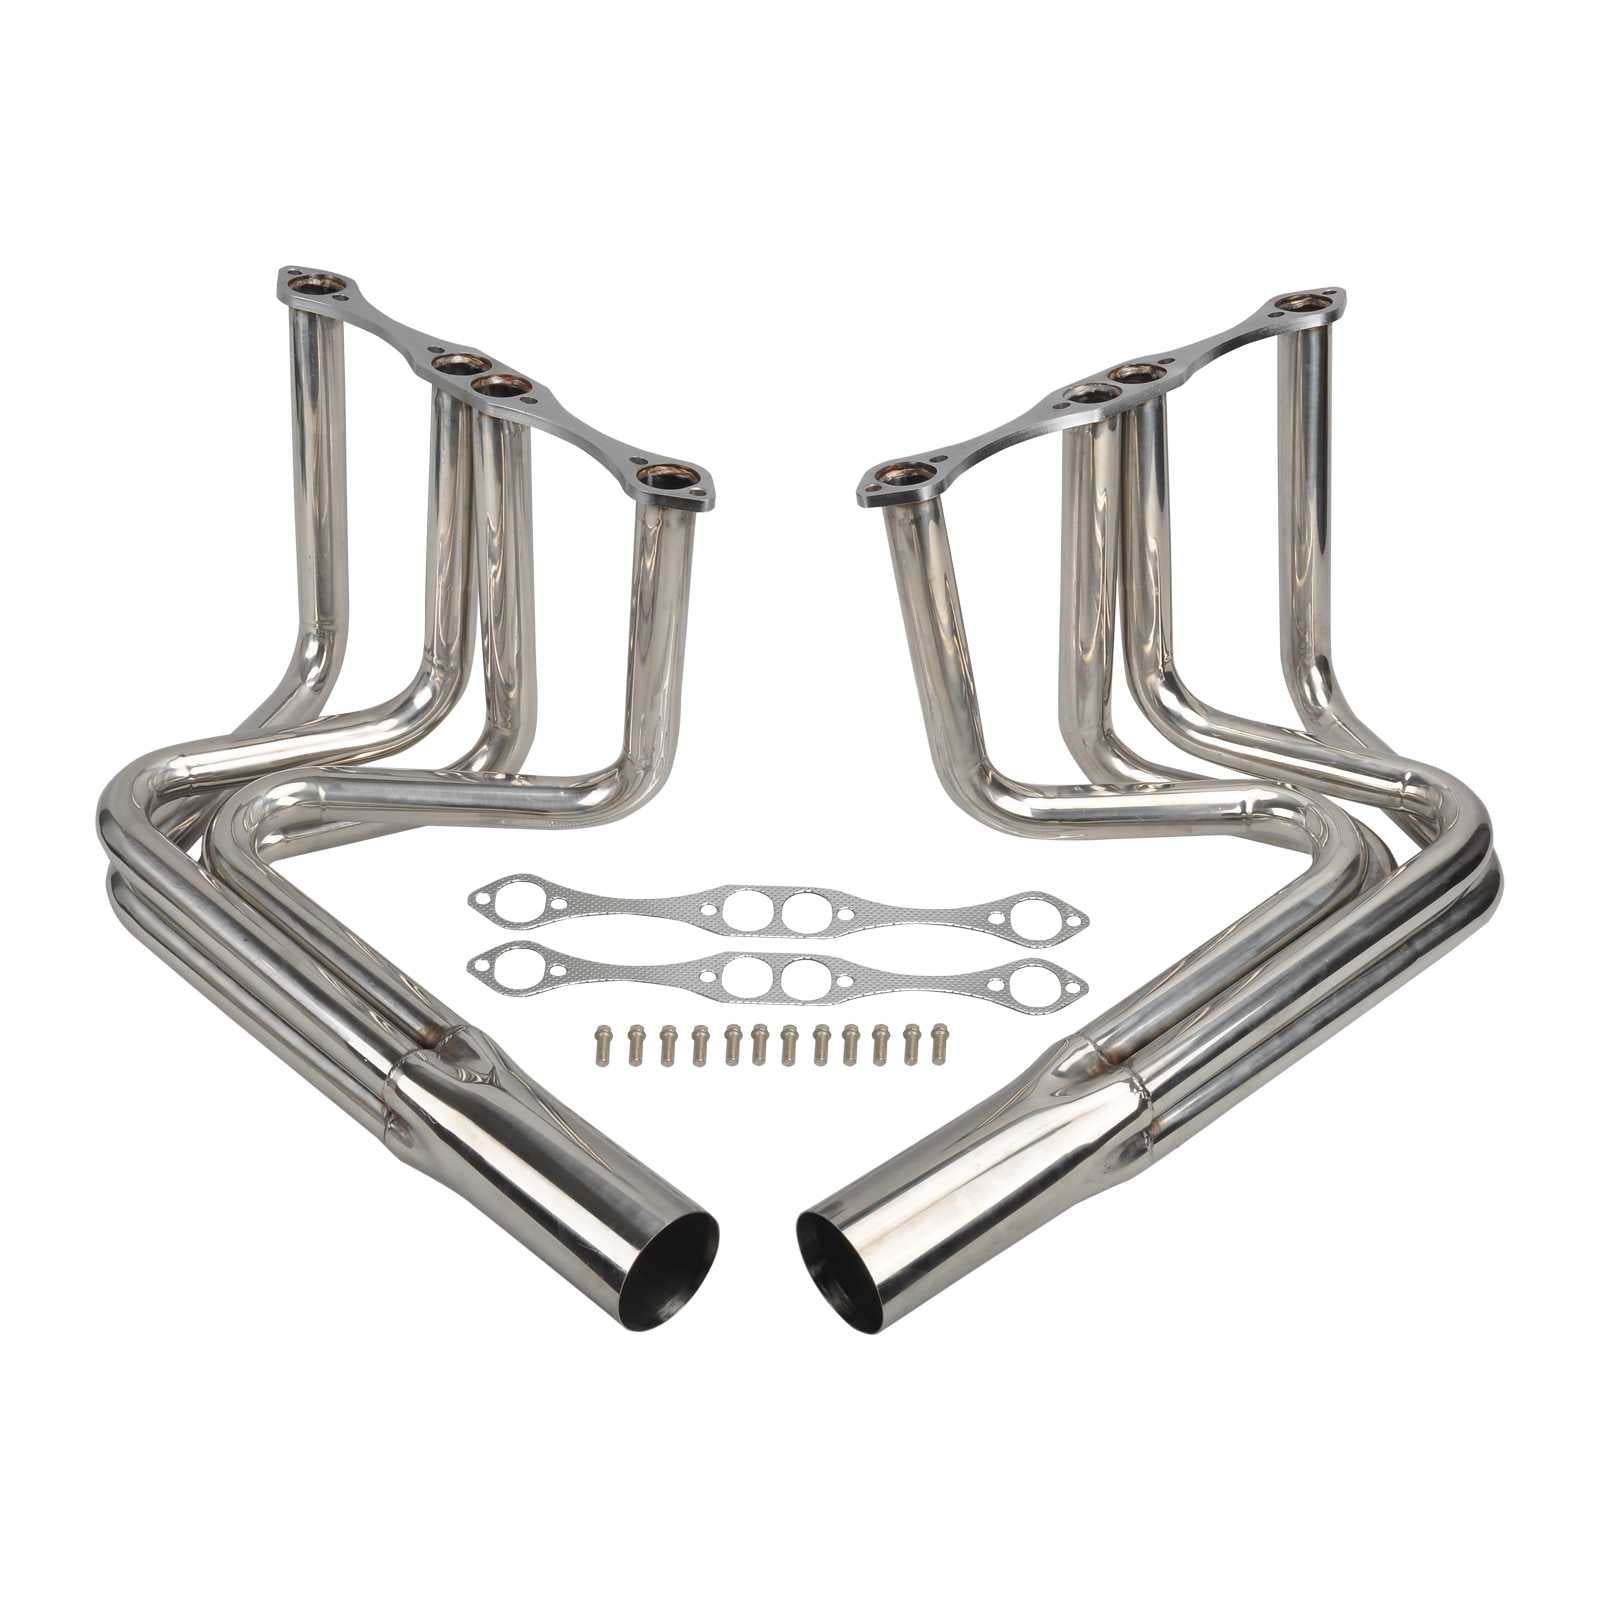 Exhaust Header for Small Block Chevy Sprint Roadster 265-400 V8 engine Flashark